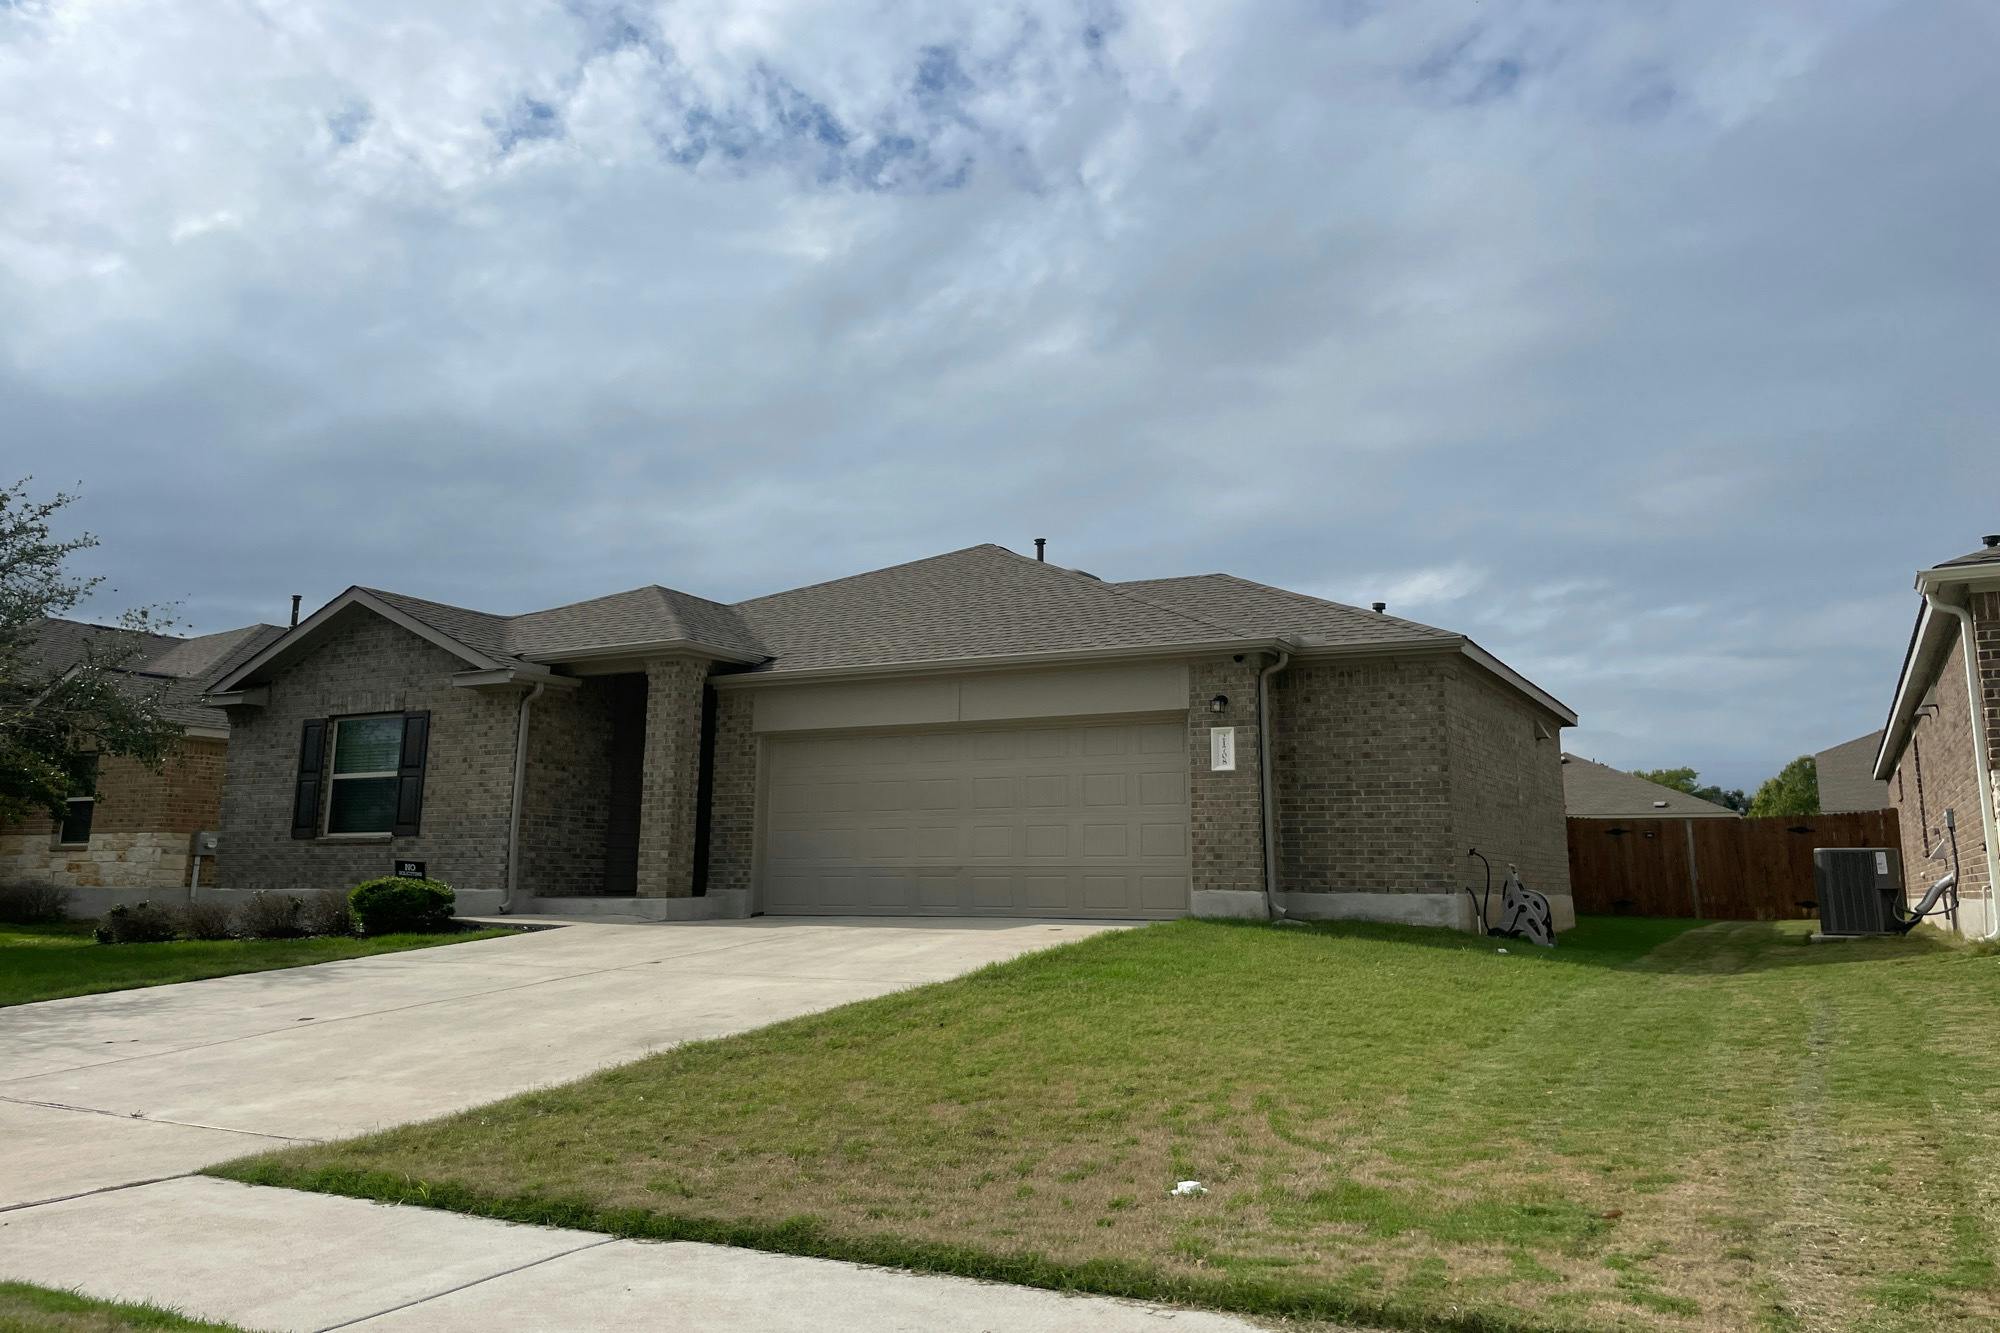 Windmill Ranch Ave, Pflugerville, TX 78660 #1